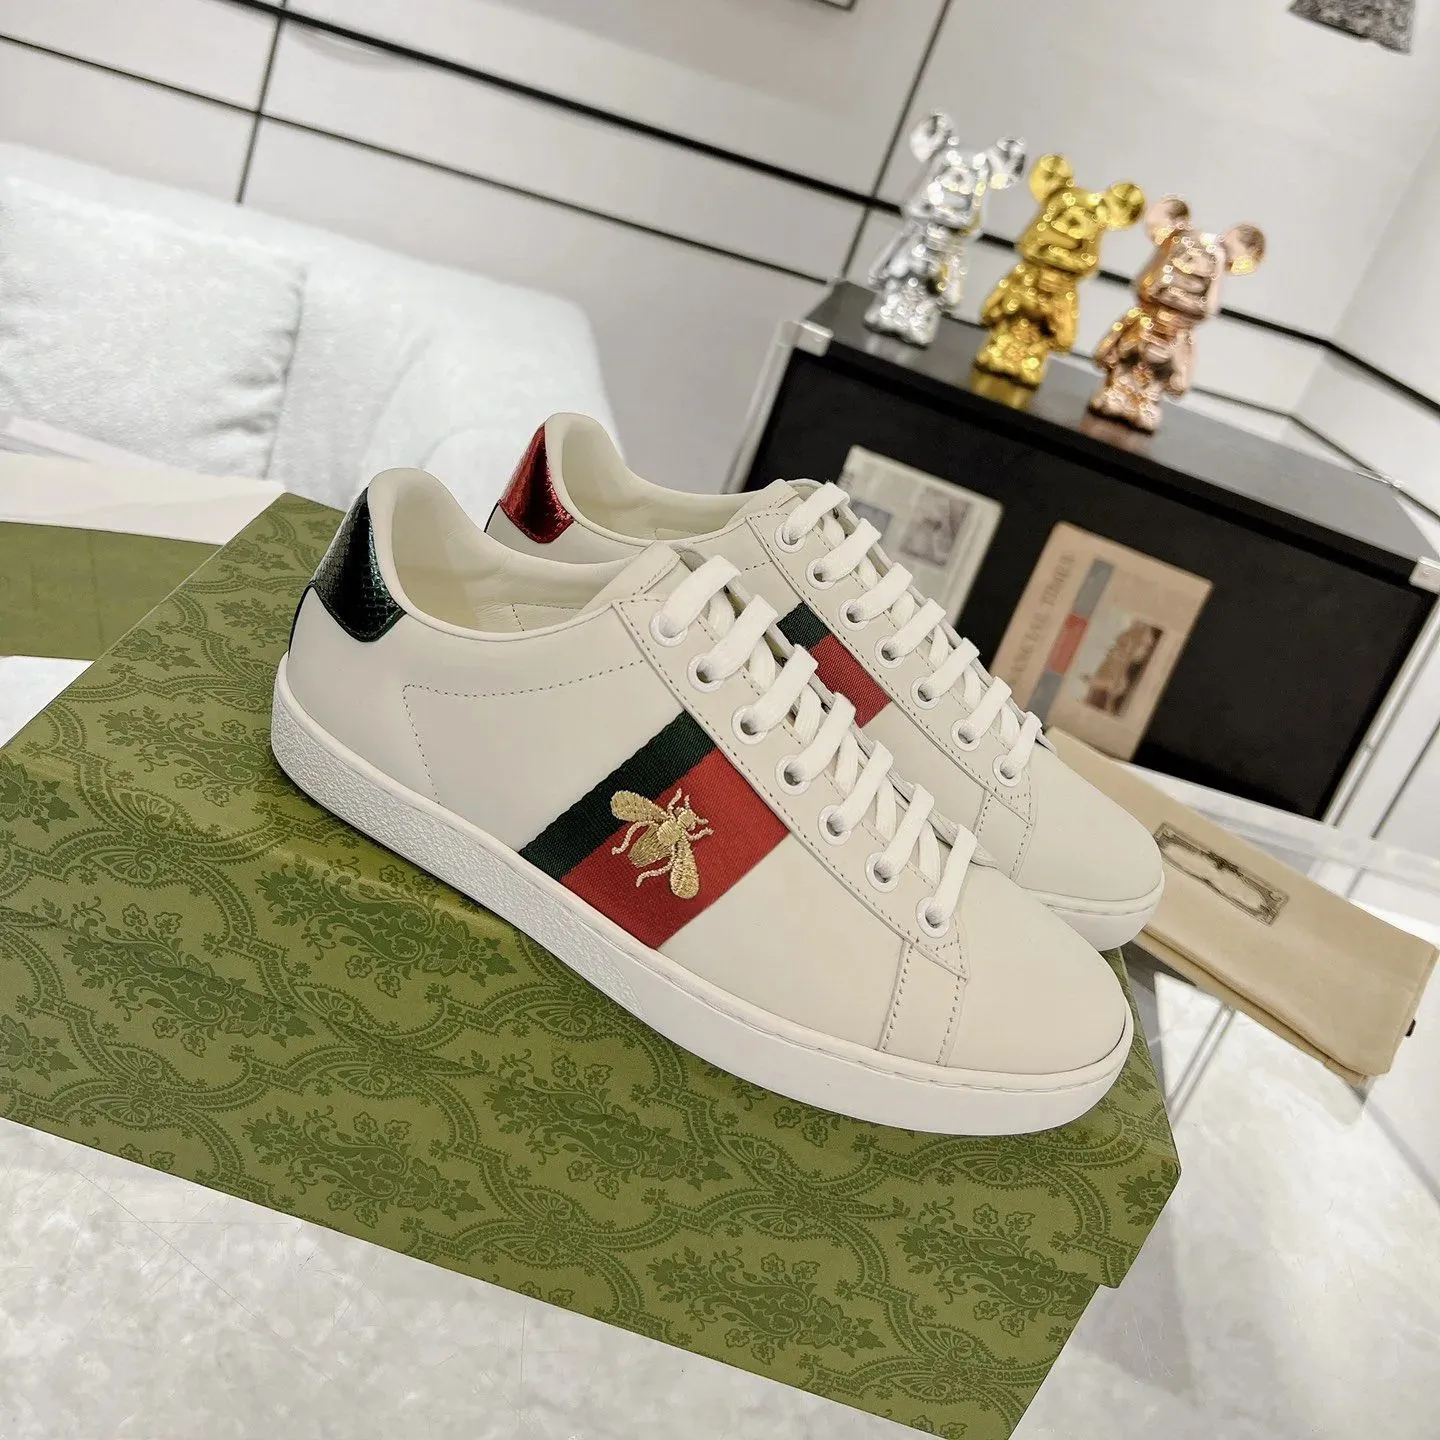 Designer Casual Sneakers Marque Chaussures Low Sport Chaussures Entraîneur Hommes Femmes Baskets Tiger Snake Bee Brodé Rouge Vert Rayures Chaussures Taille 35-44